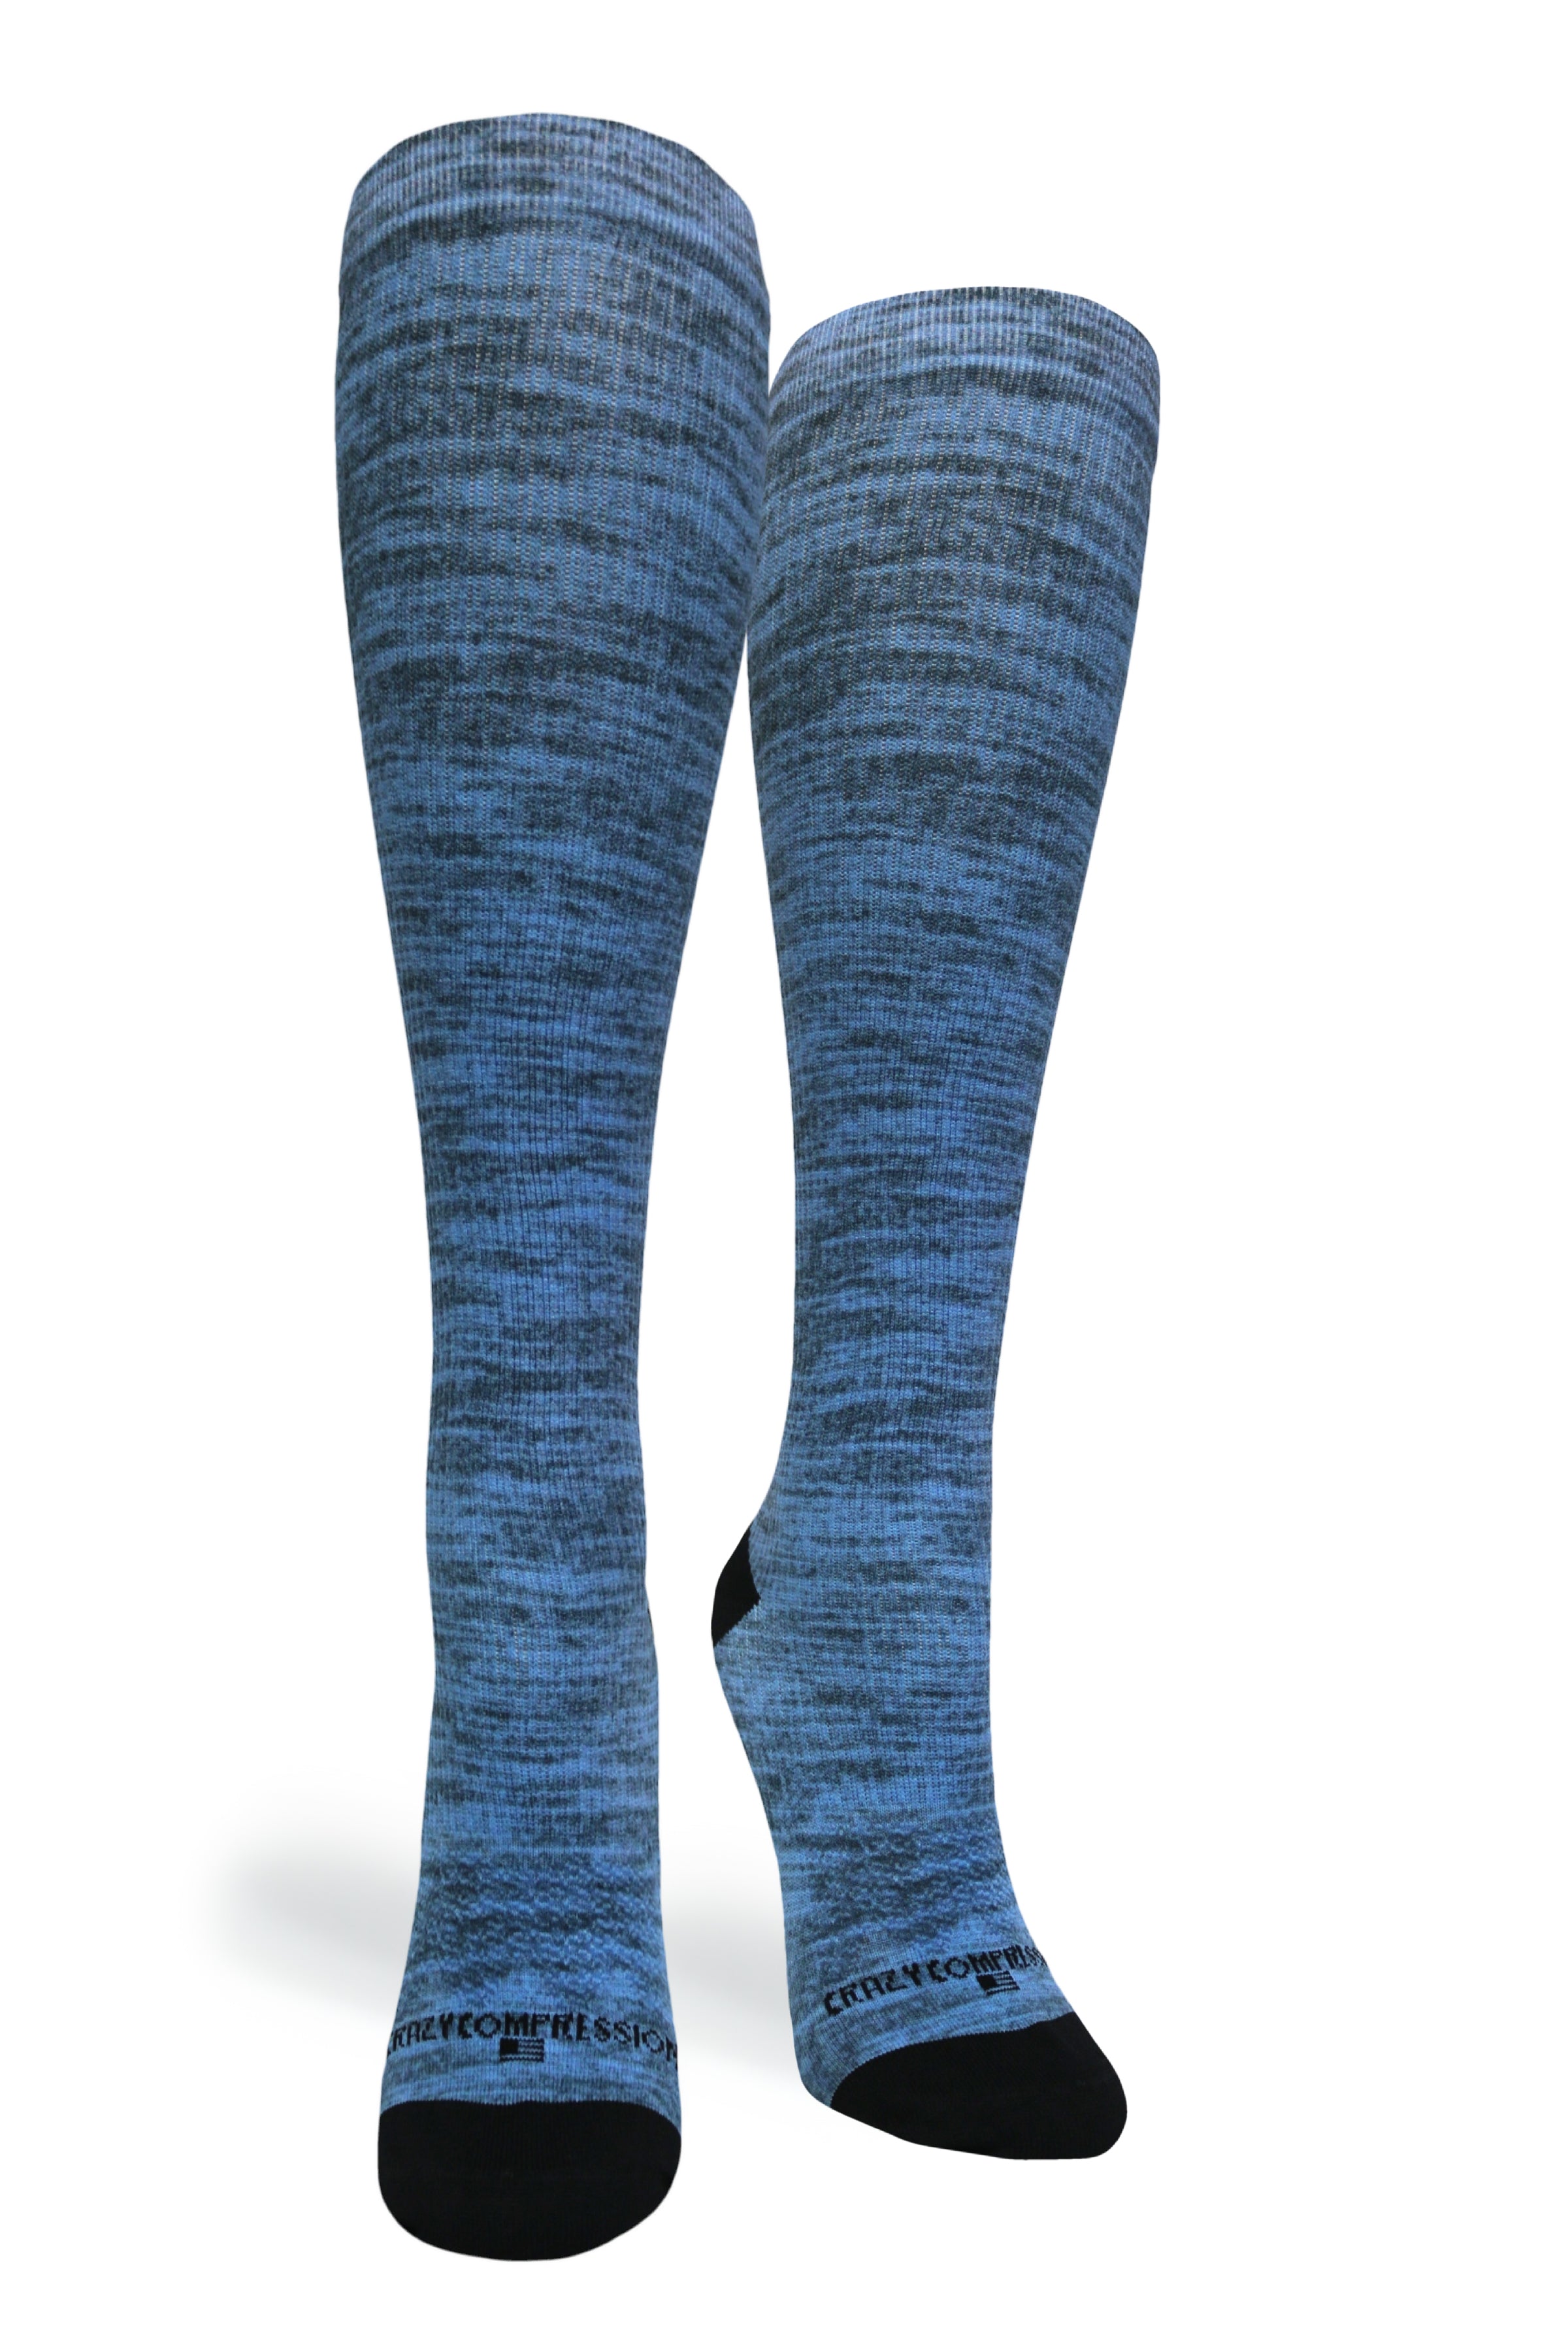 Mens and Womens Compression Socks